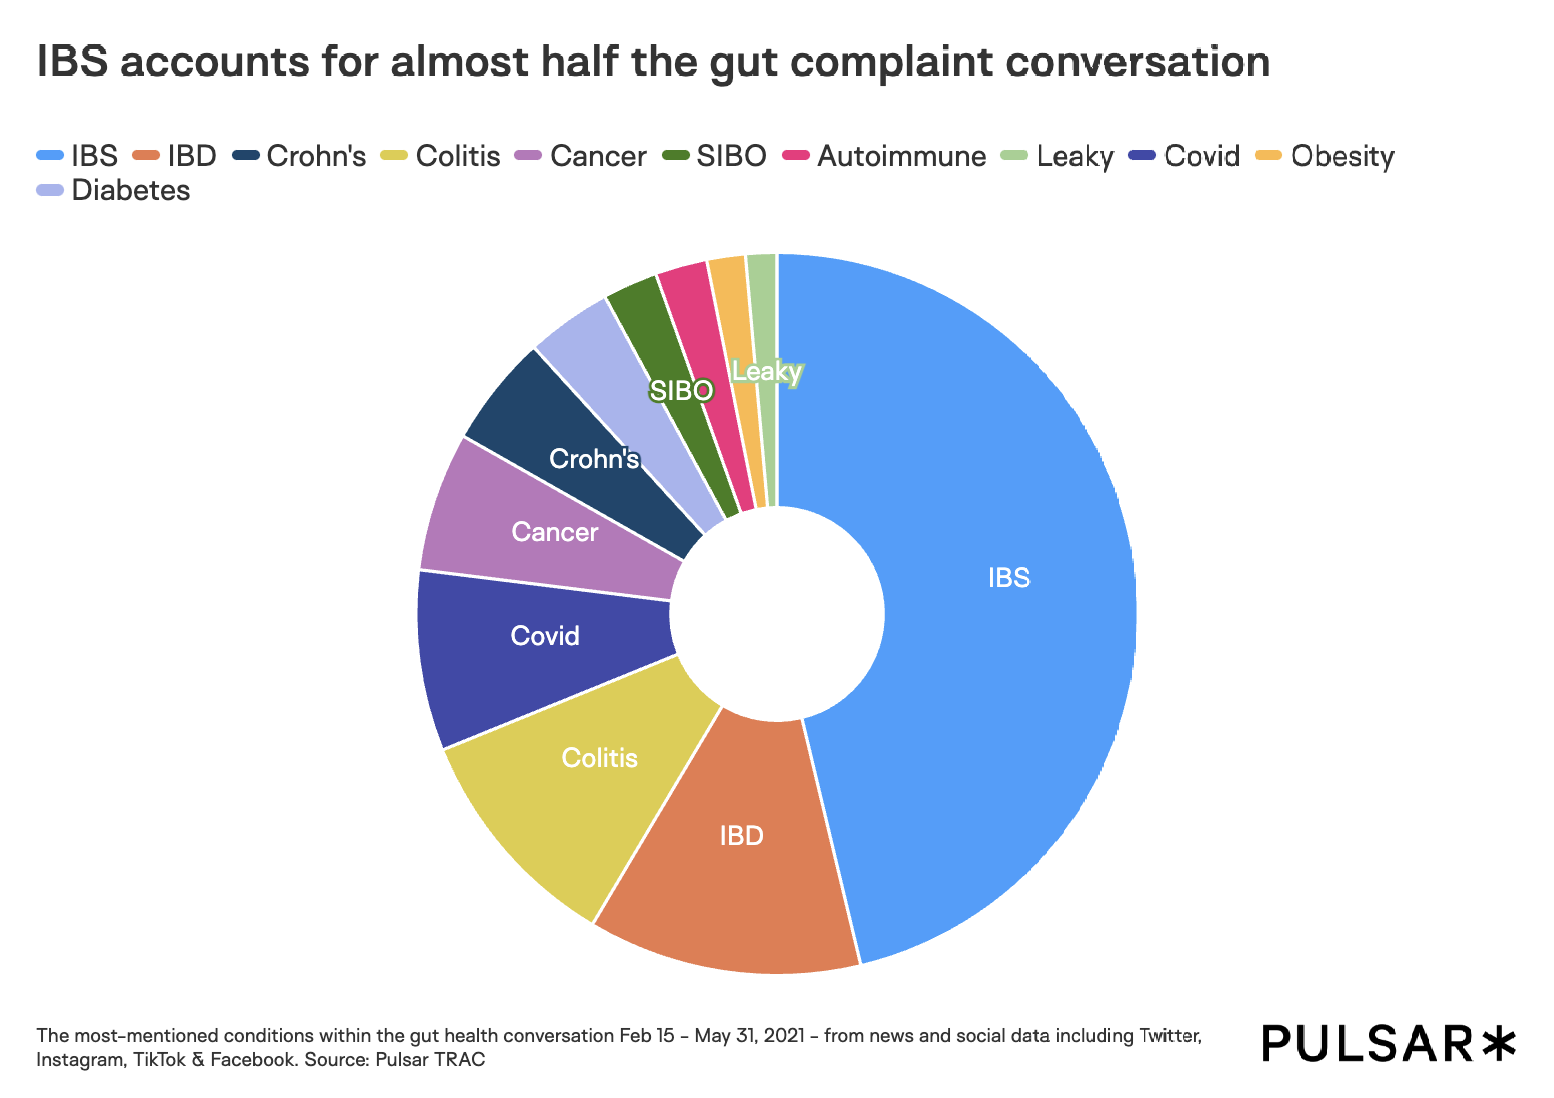 IBS accounts for almost half the gut complaint conversation